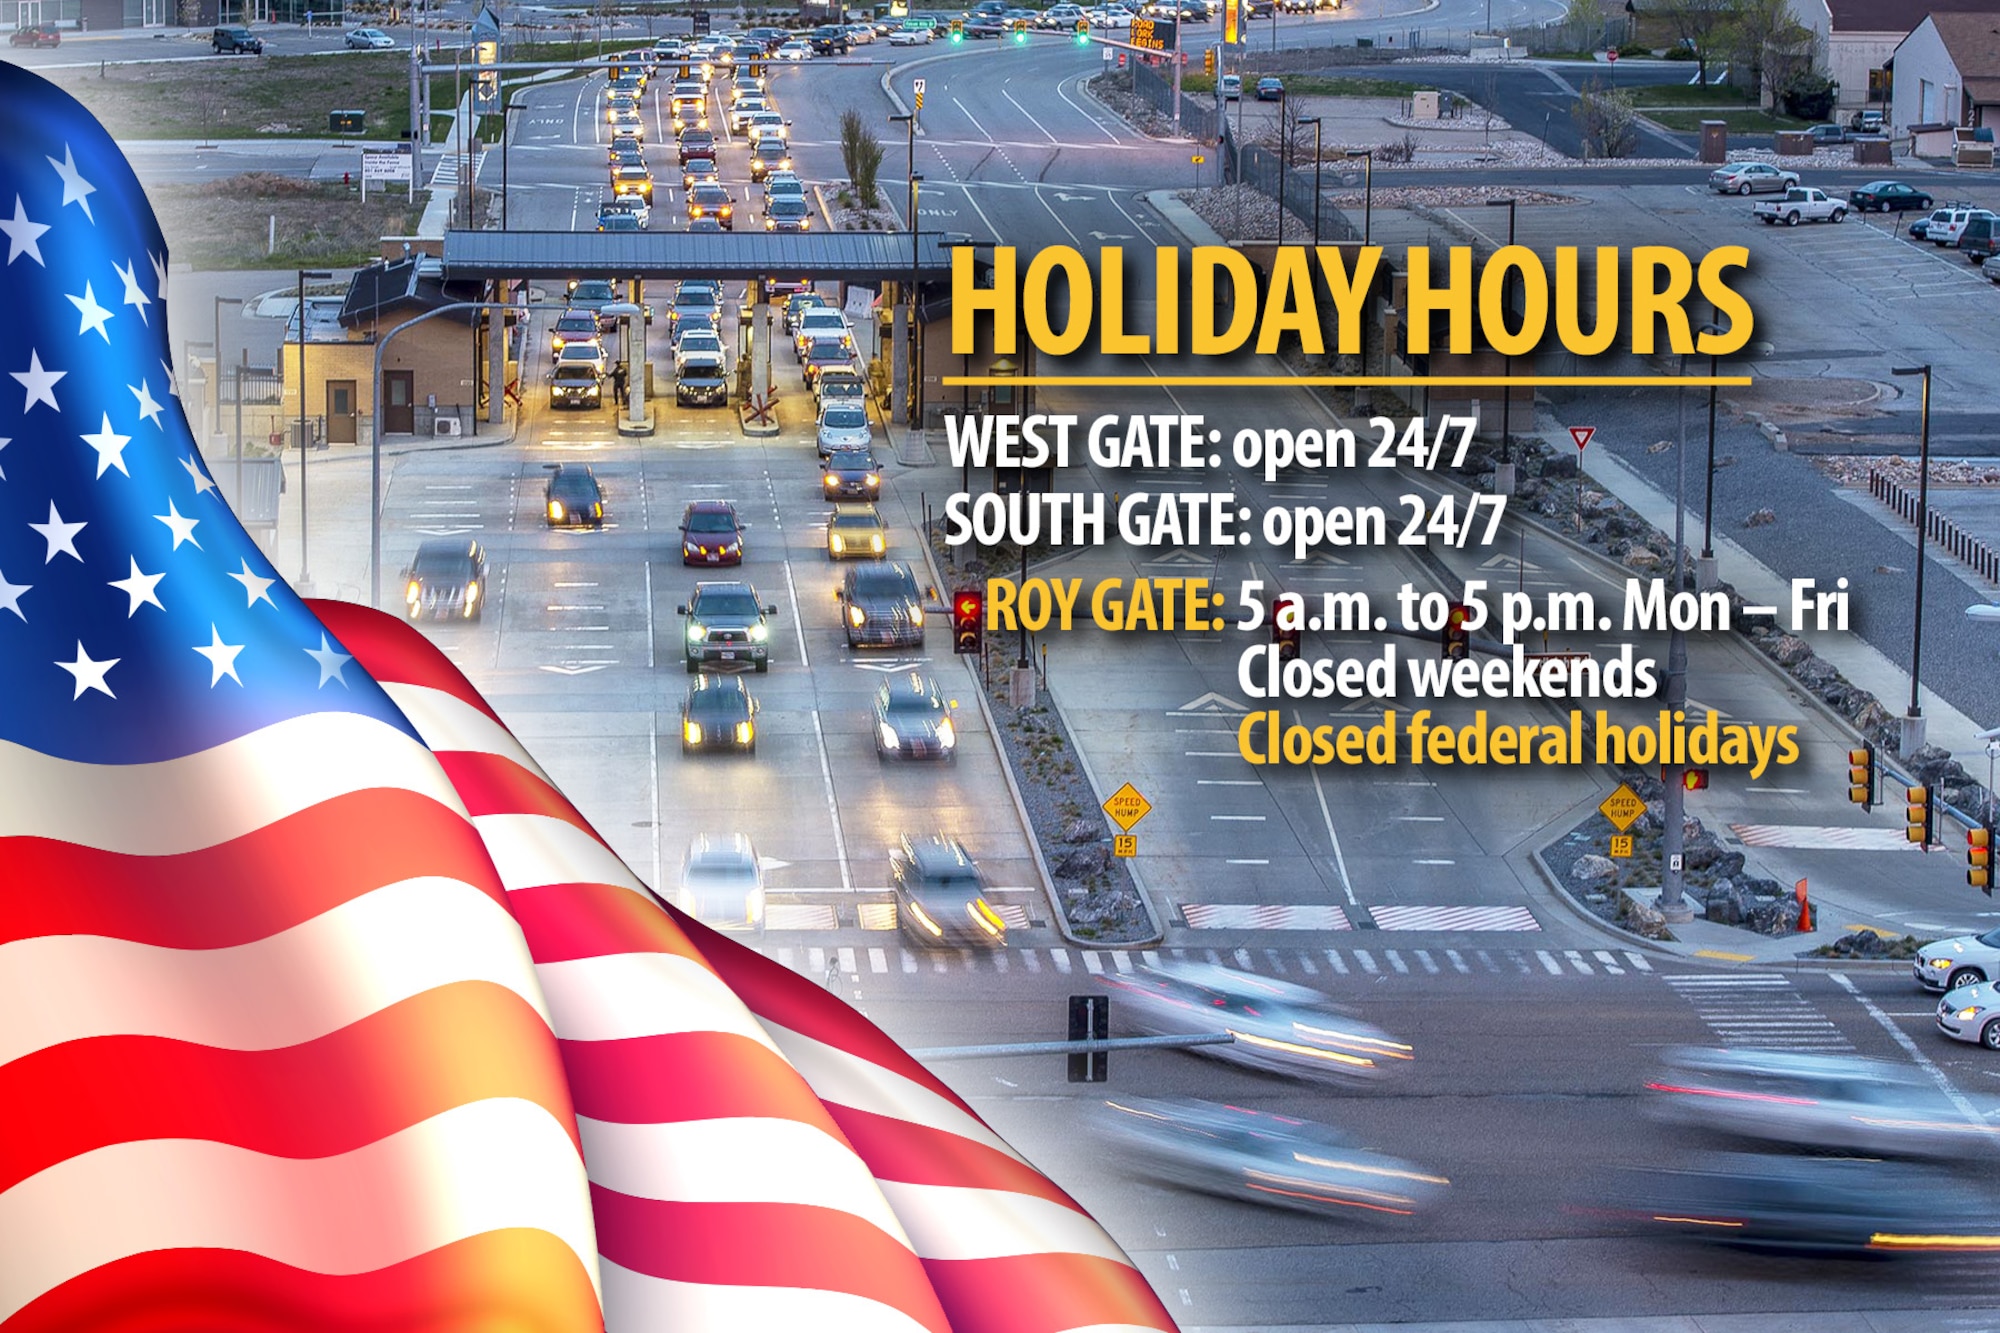 an American flag drapes in the corner of the graphic with traffic depicted arriving on base through the West Gate.